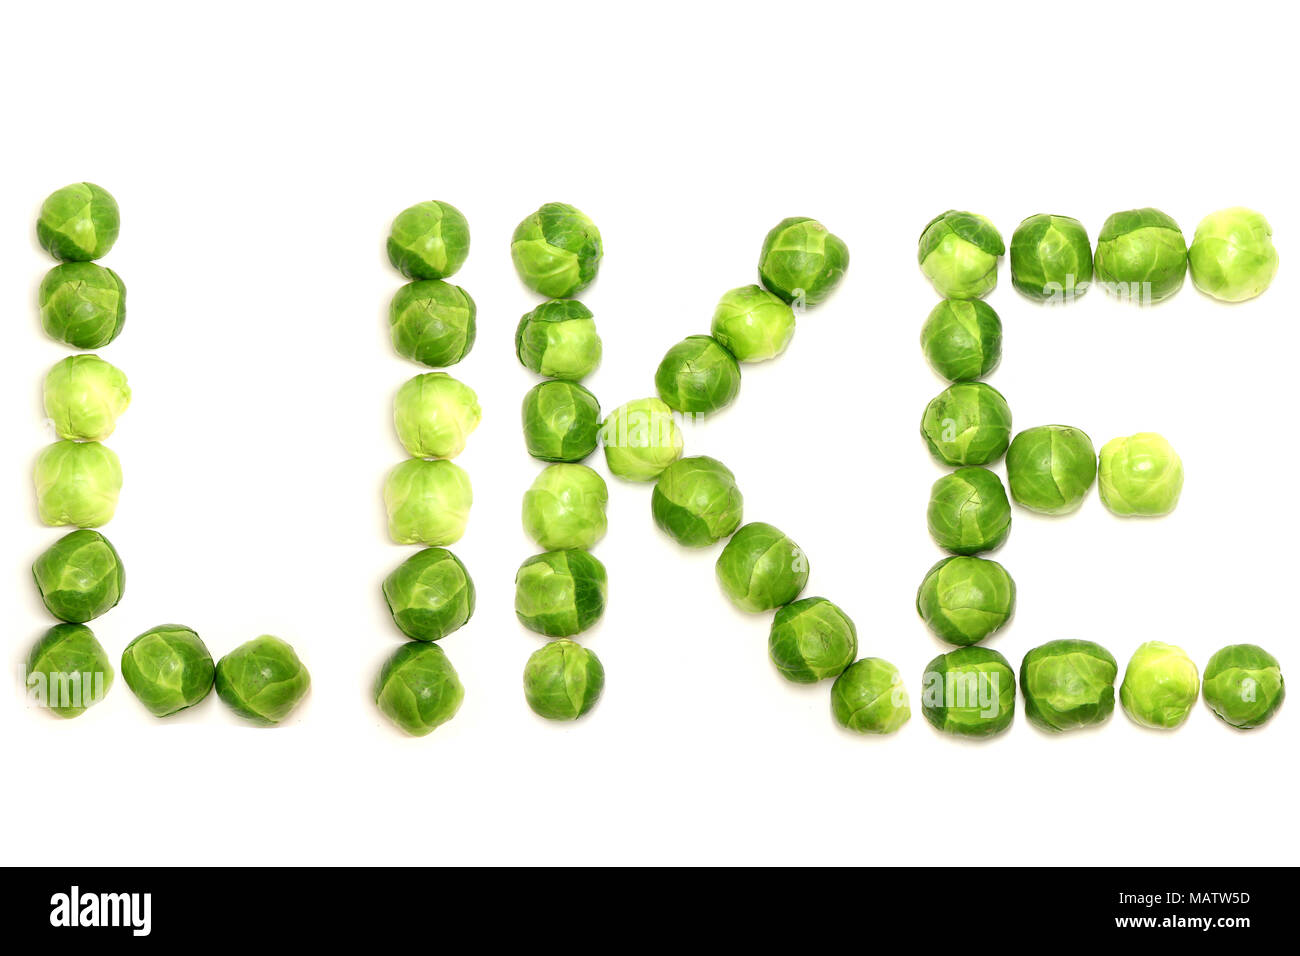 Brussel sprouts spelling the word like on a plain white background Stock Photo